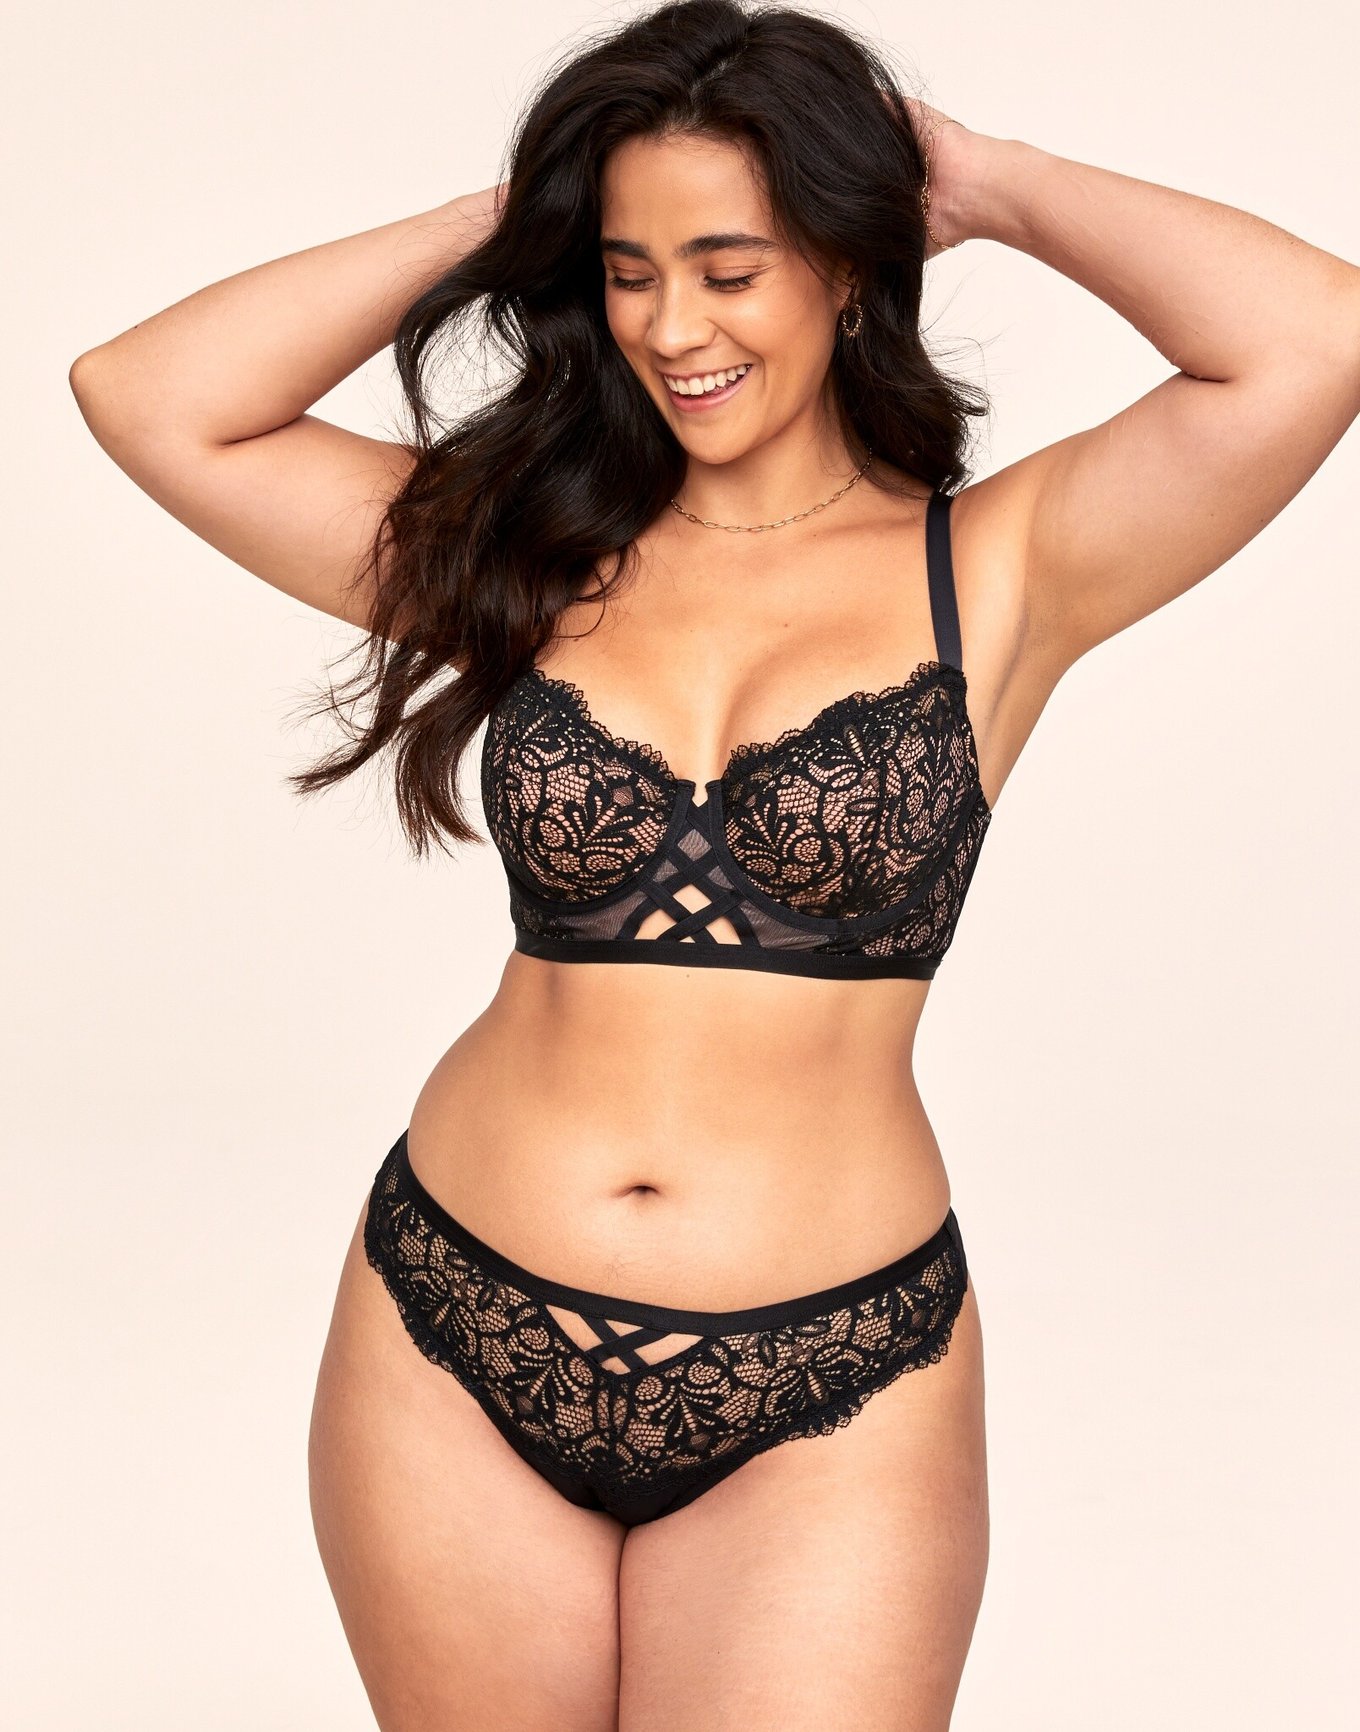 Adore Me Black and Nude Lace Bra in 46DDD  Nude lace, Black and nude,  Clothes design